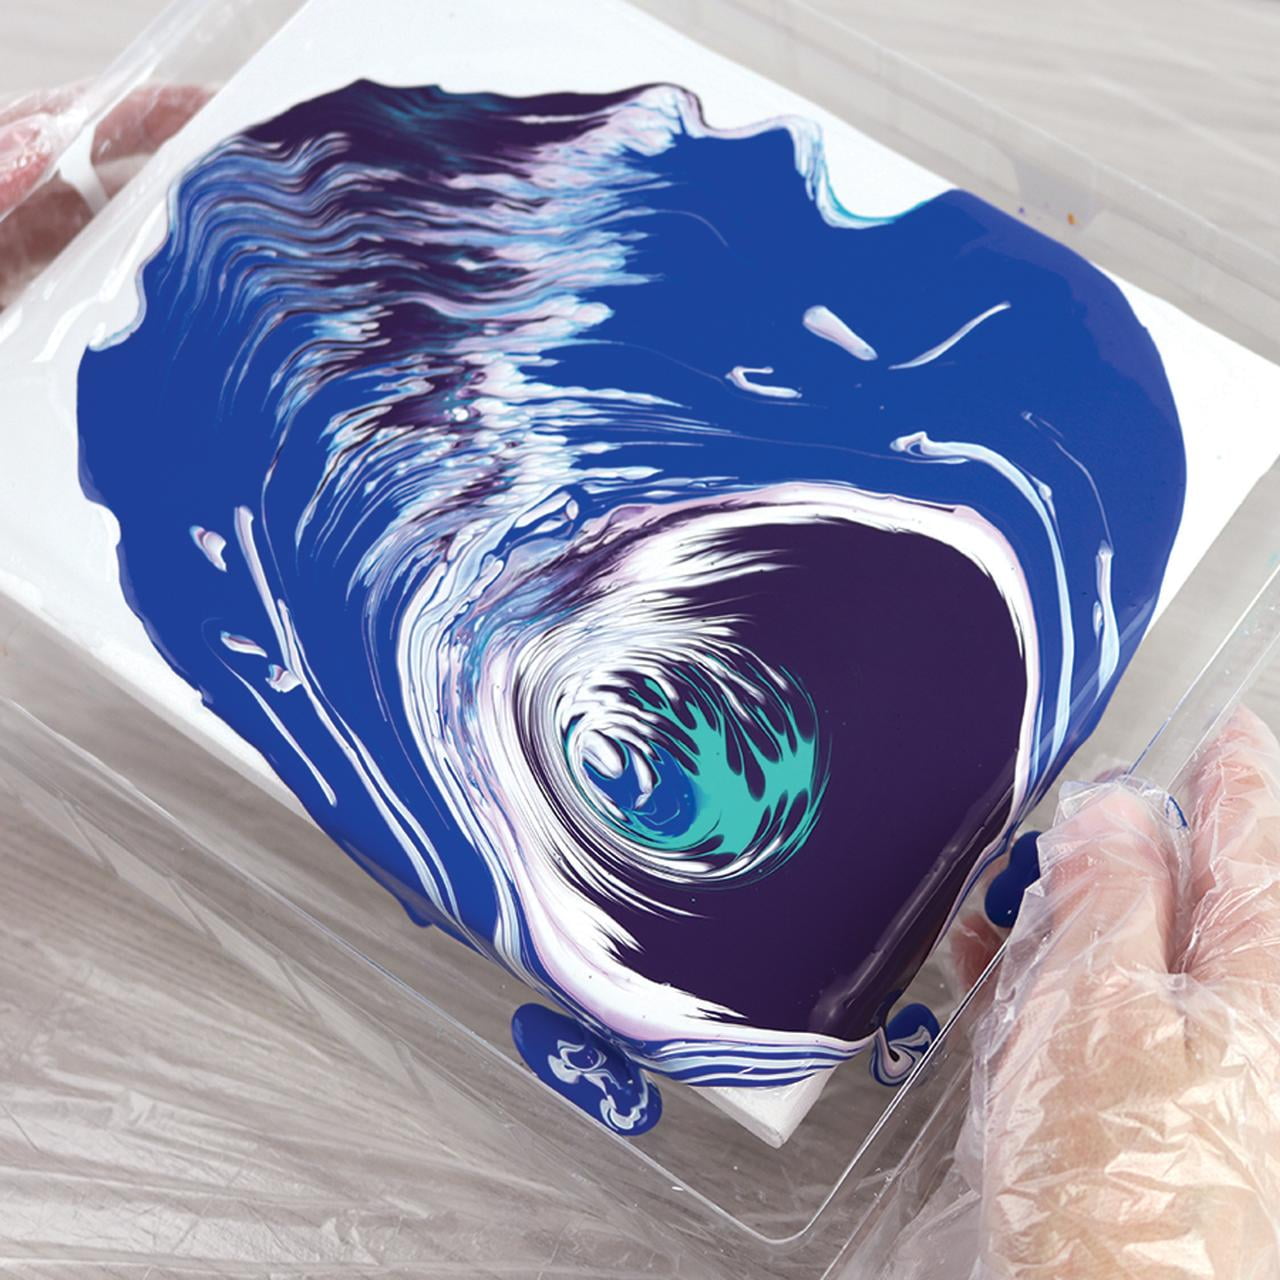 ArtSkills Paint Pouring Kit with Glitter and Canvas Boards in the